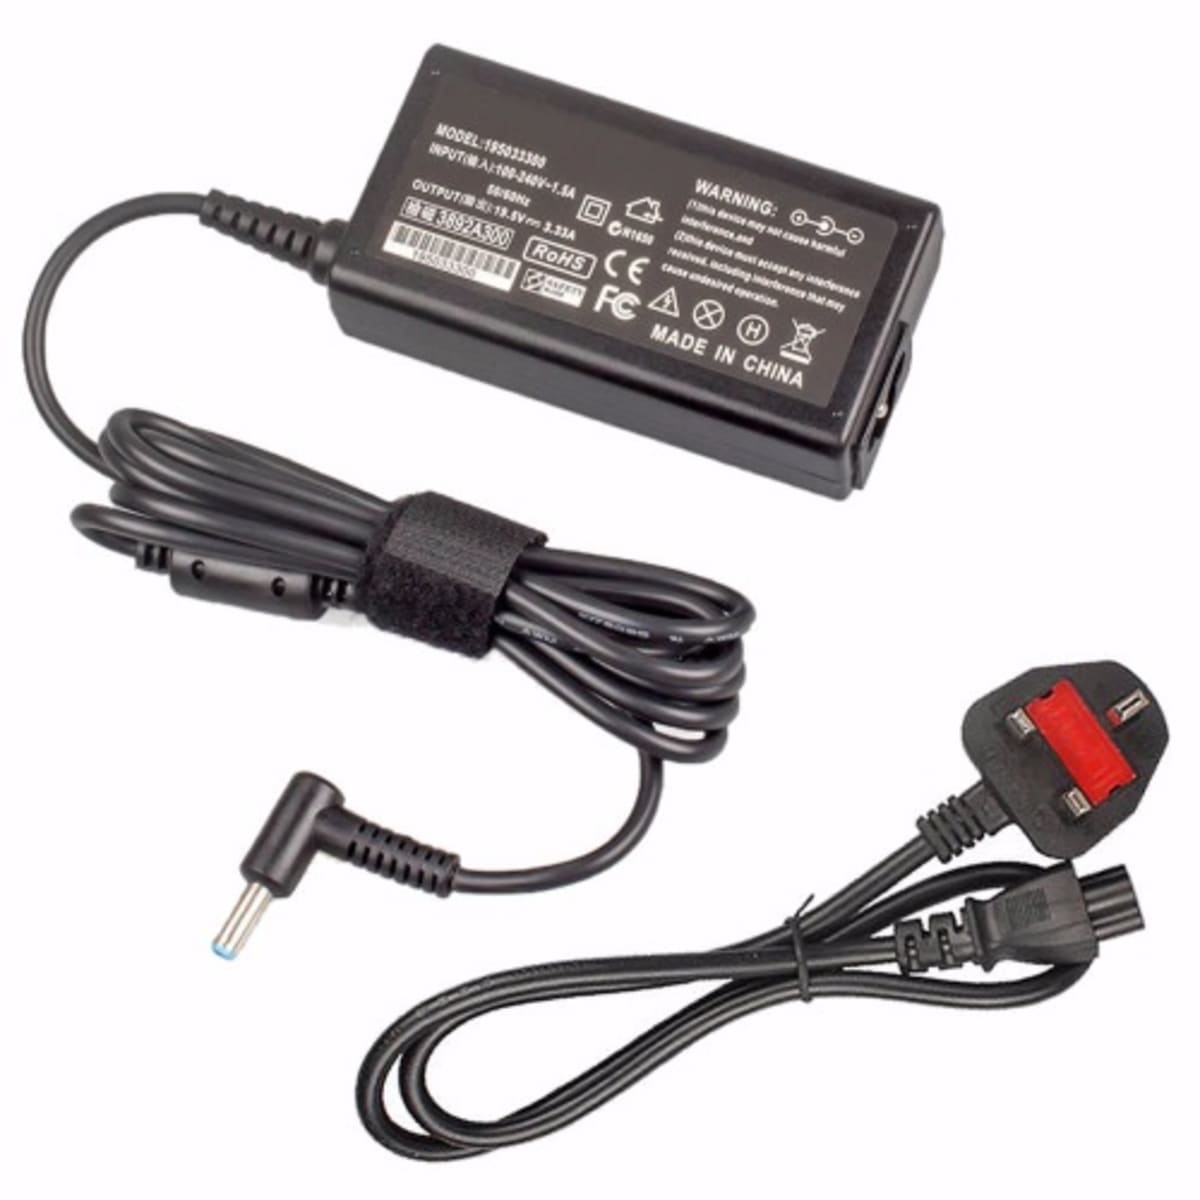 Insignia™ Universal 180W High Power Laptop Charger Black